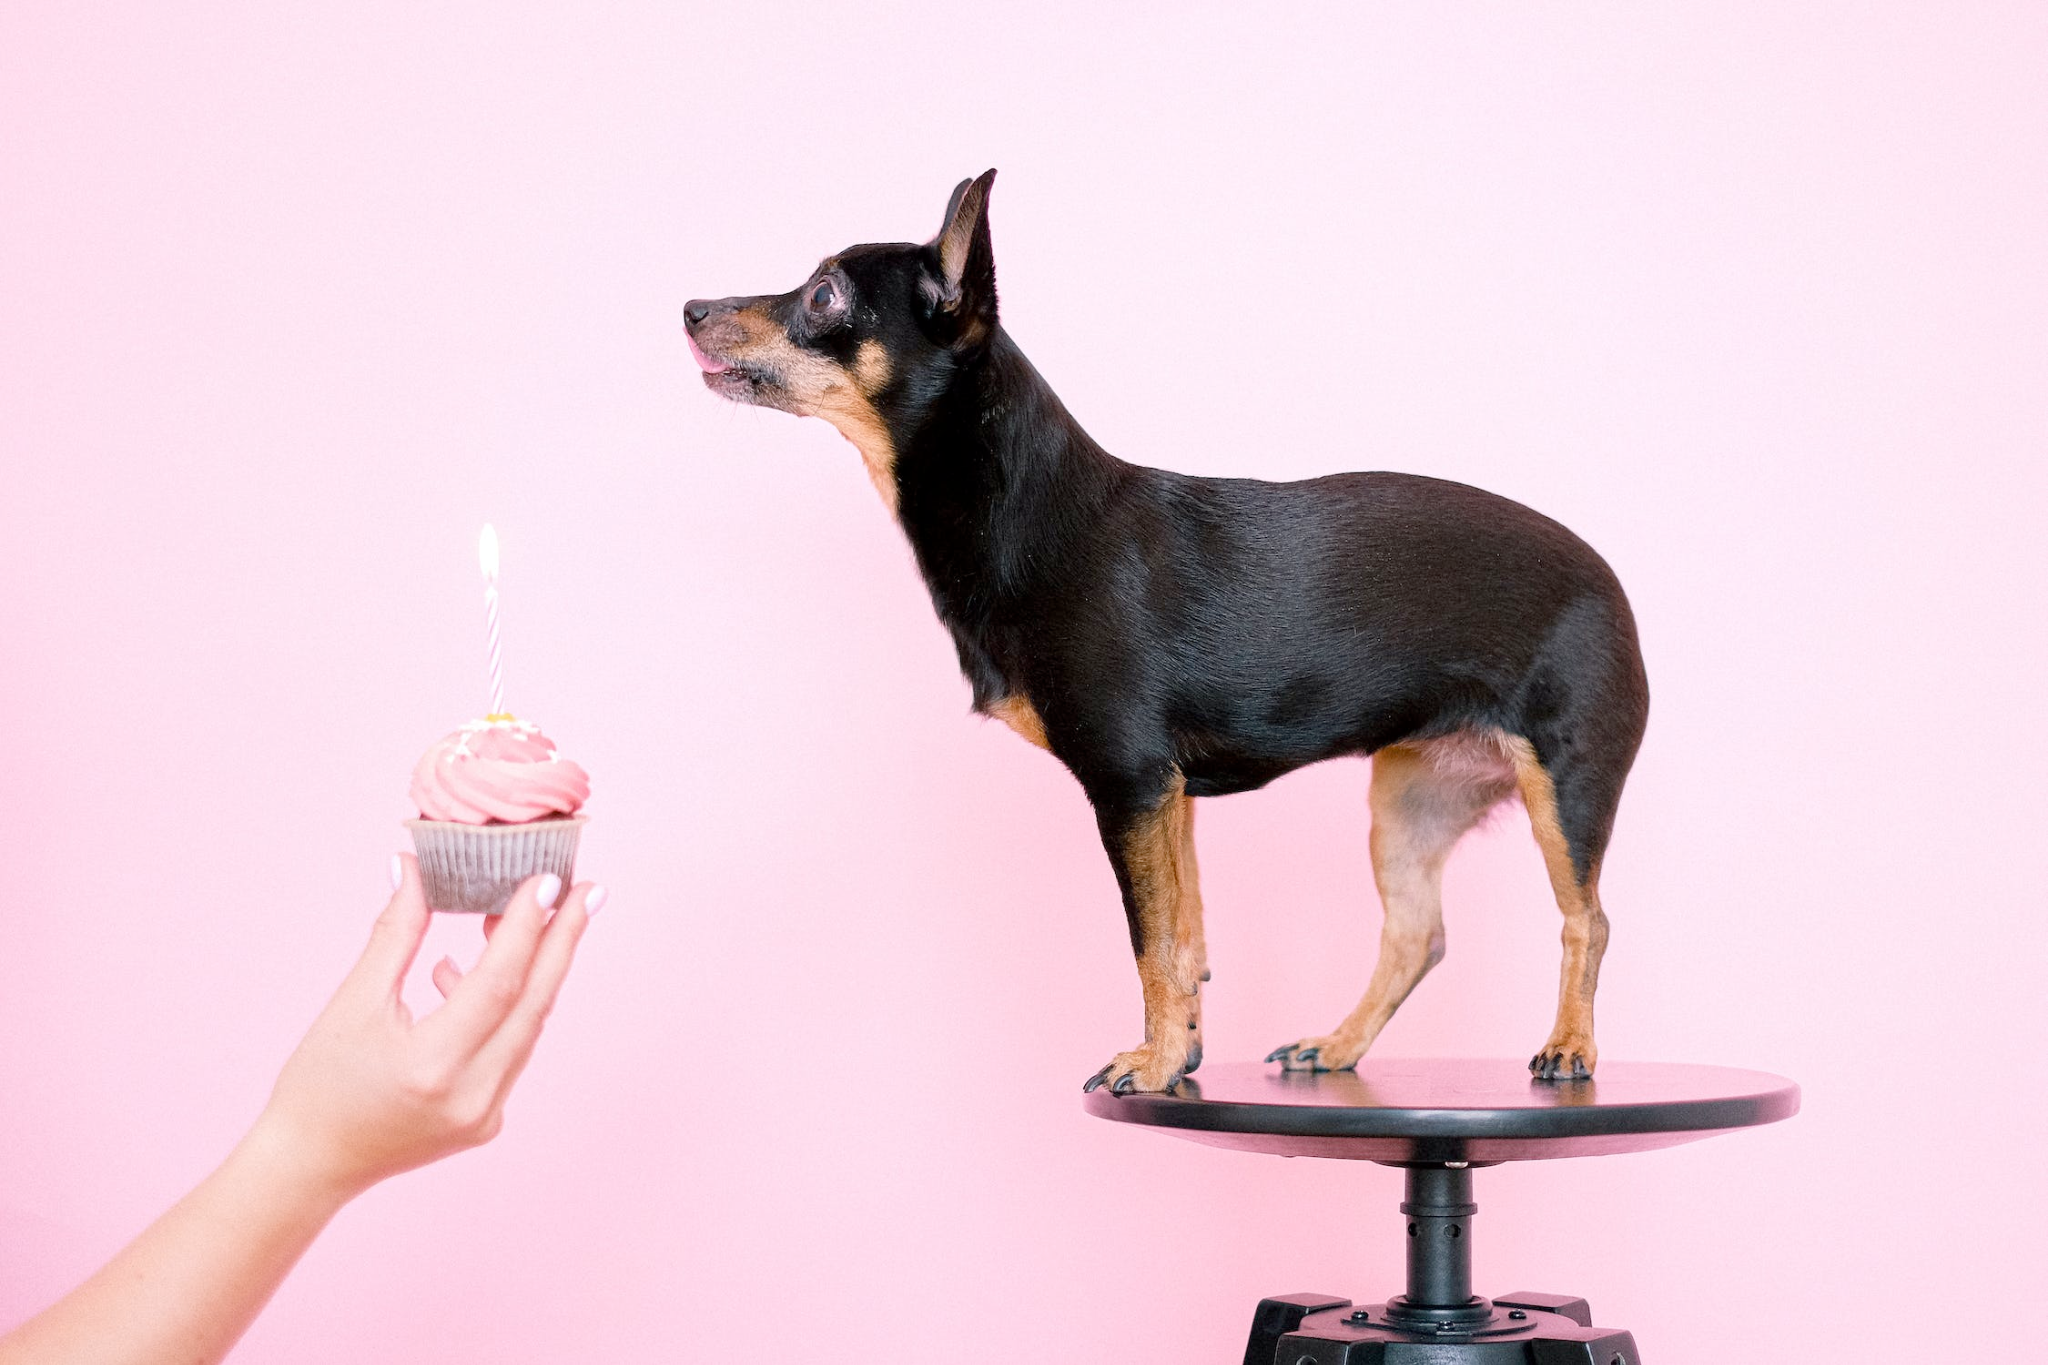 An image of a person offering a cupcake to a dog